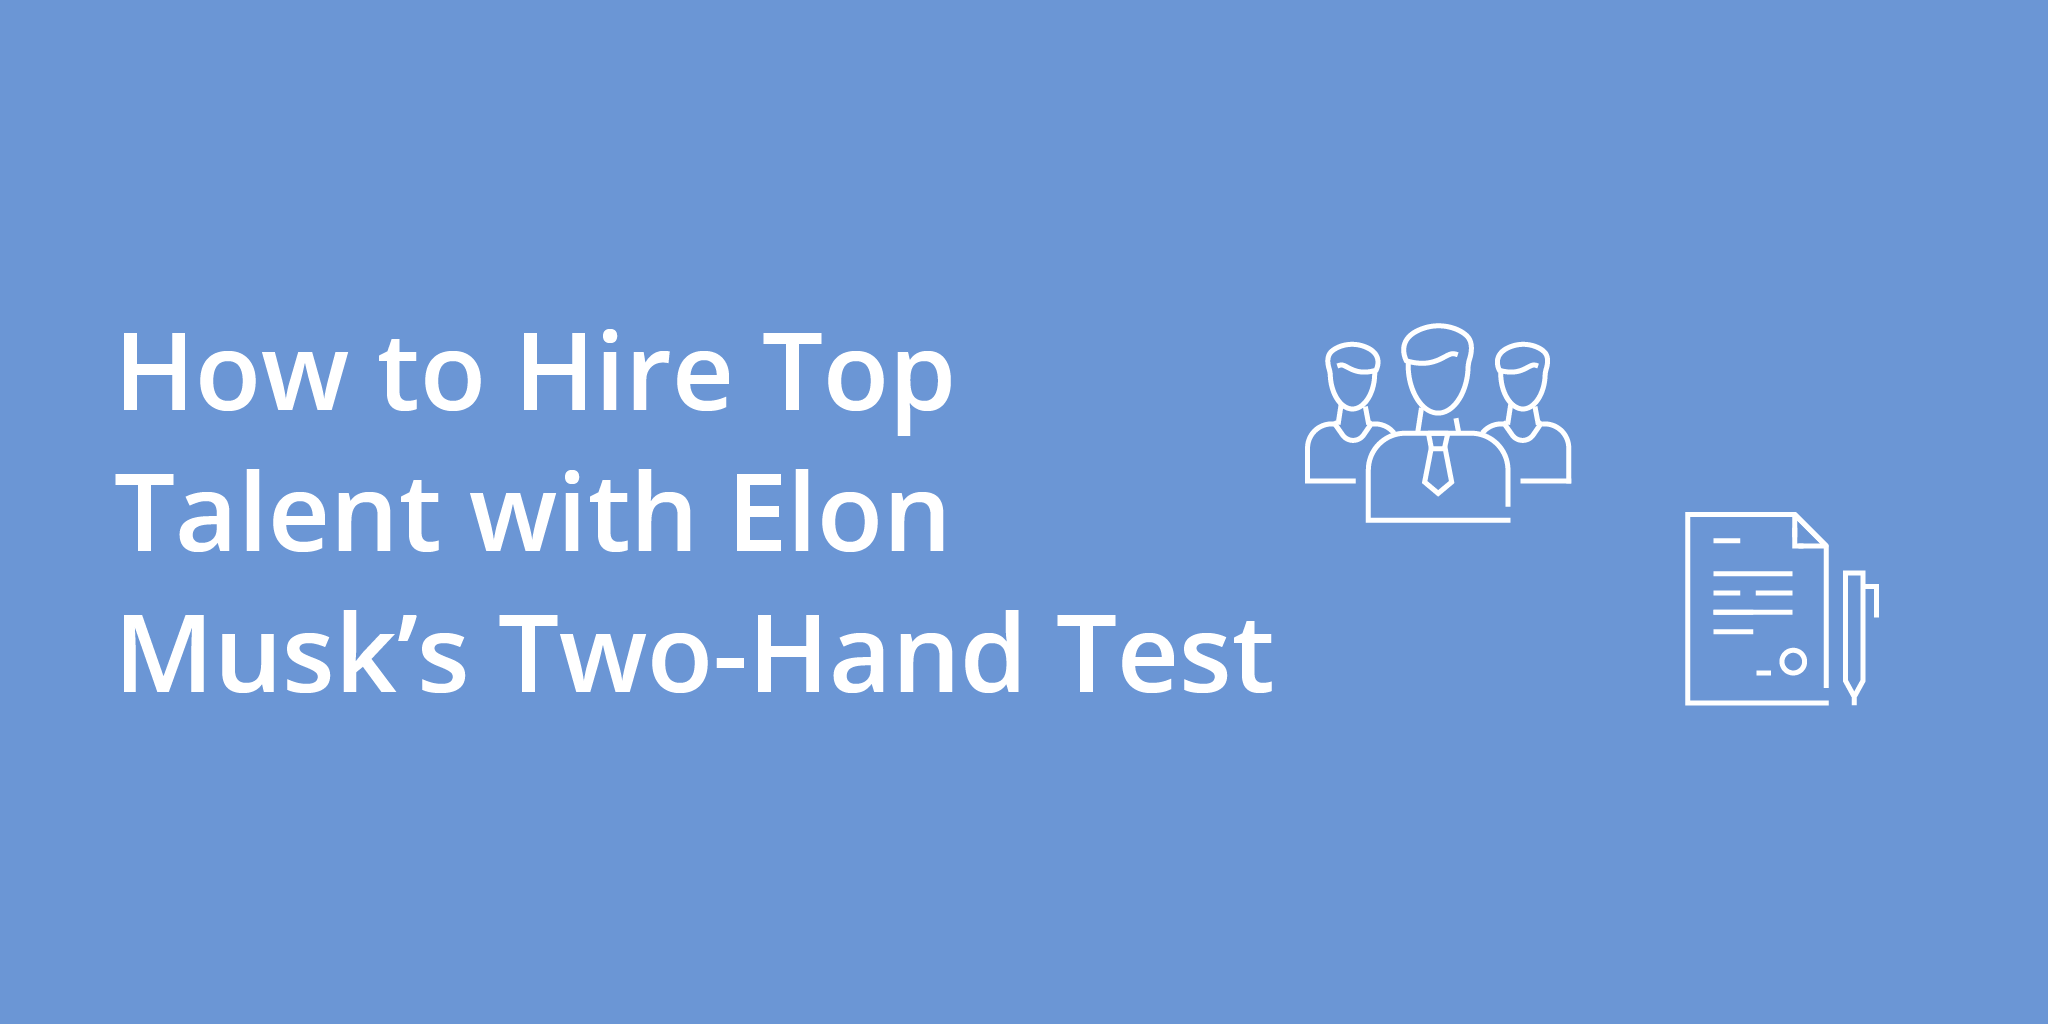 How to Hire Top Talent with Elon Musk’s Two Hands Test | Telephones for business